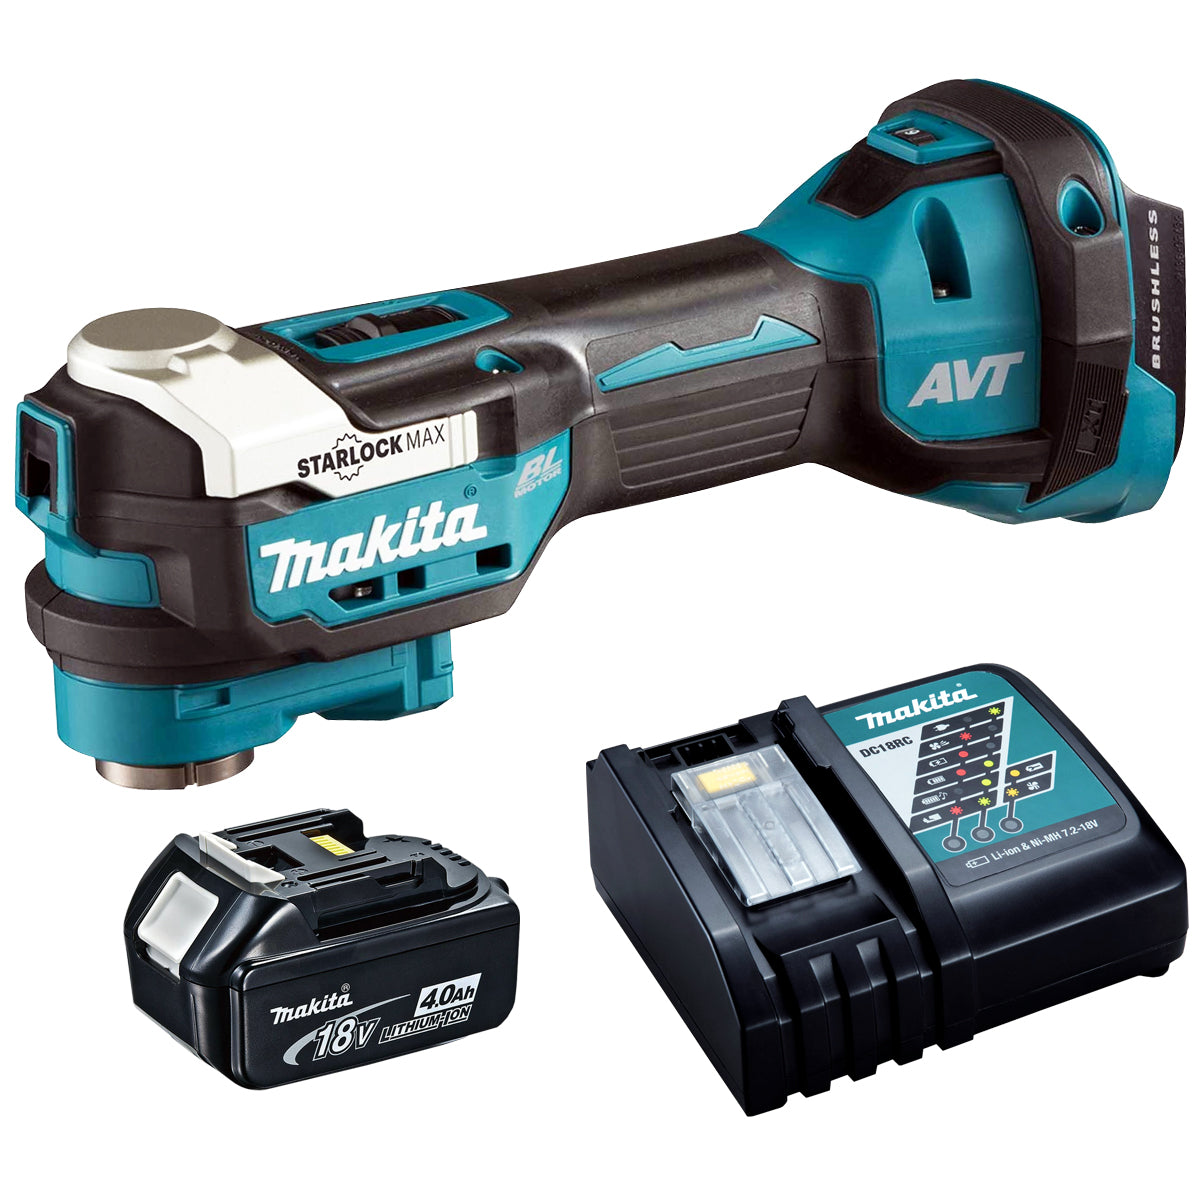 Makita DTM52Z 18V Brushless Multi Tool with 1 x 4.0Ah Battery & Charger